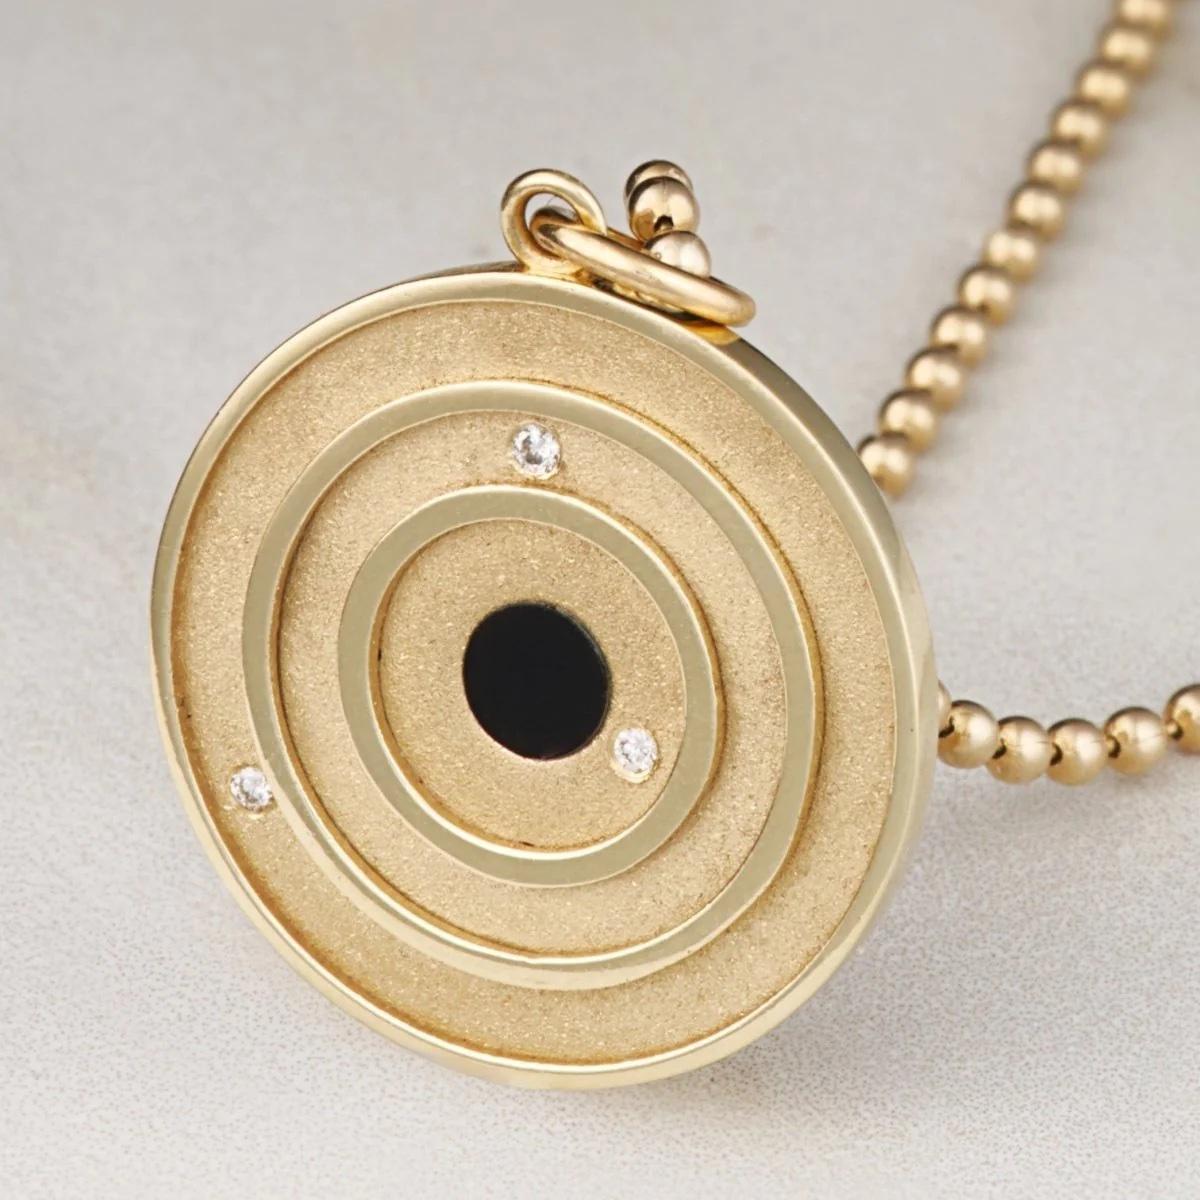 EMBLM Cosmos Pendant – 14k Gold, White Diamonds, Onyx In New Condition For Sale In Los Angeles, CA